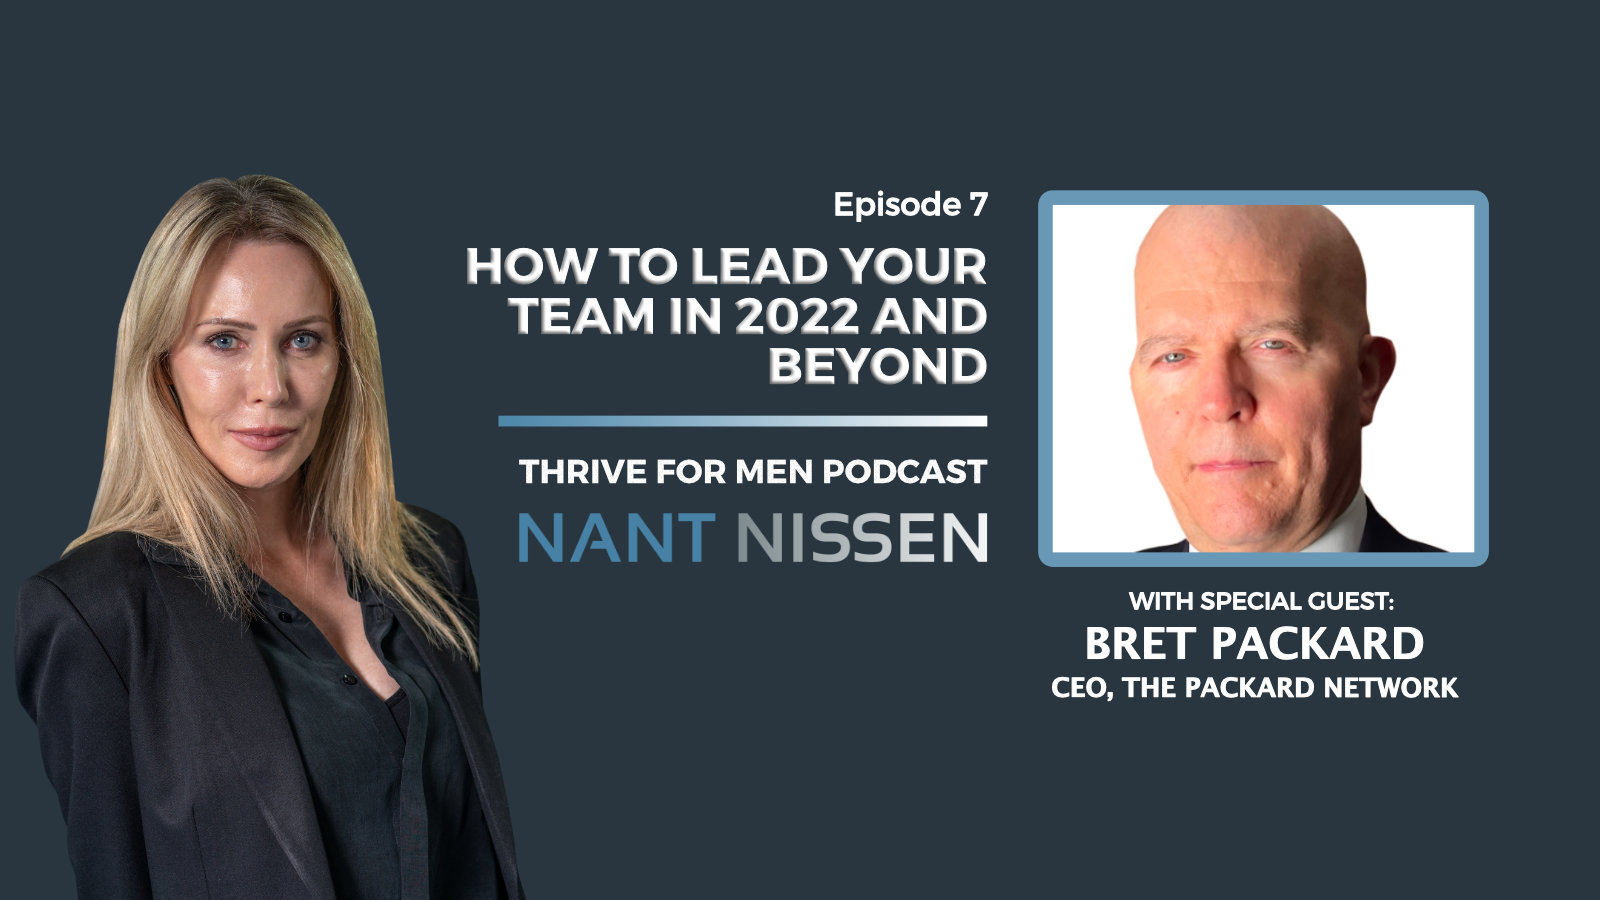 How to lead your team in 2022 and beyond on the Thrive for Men Podcast